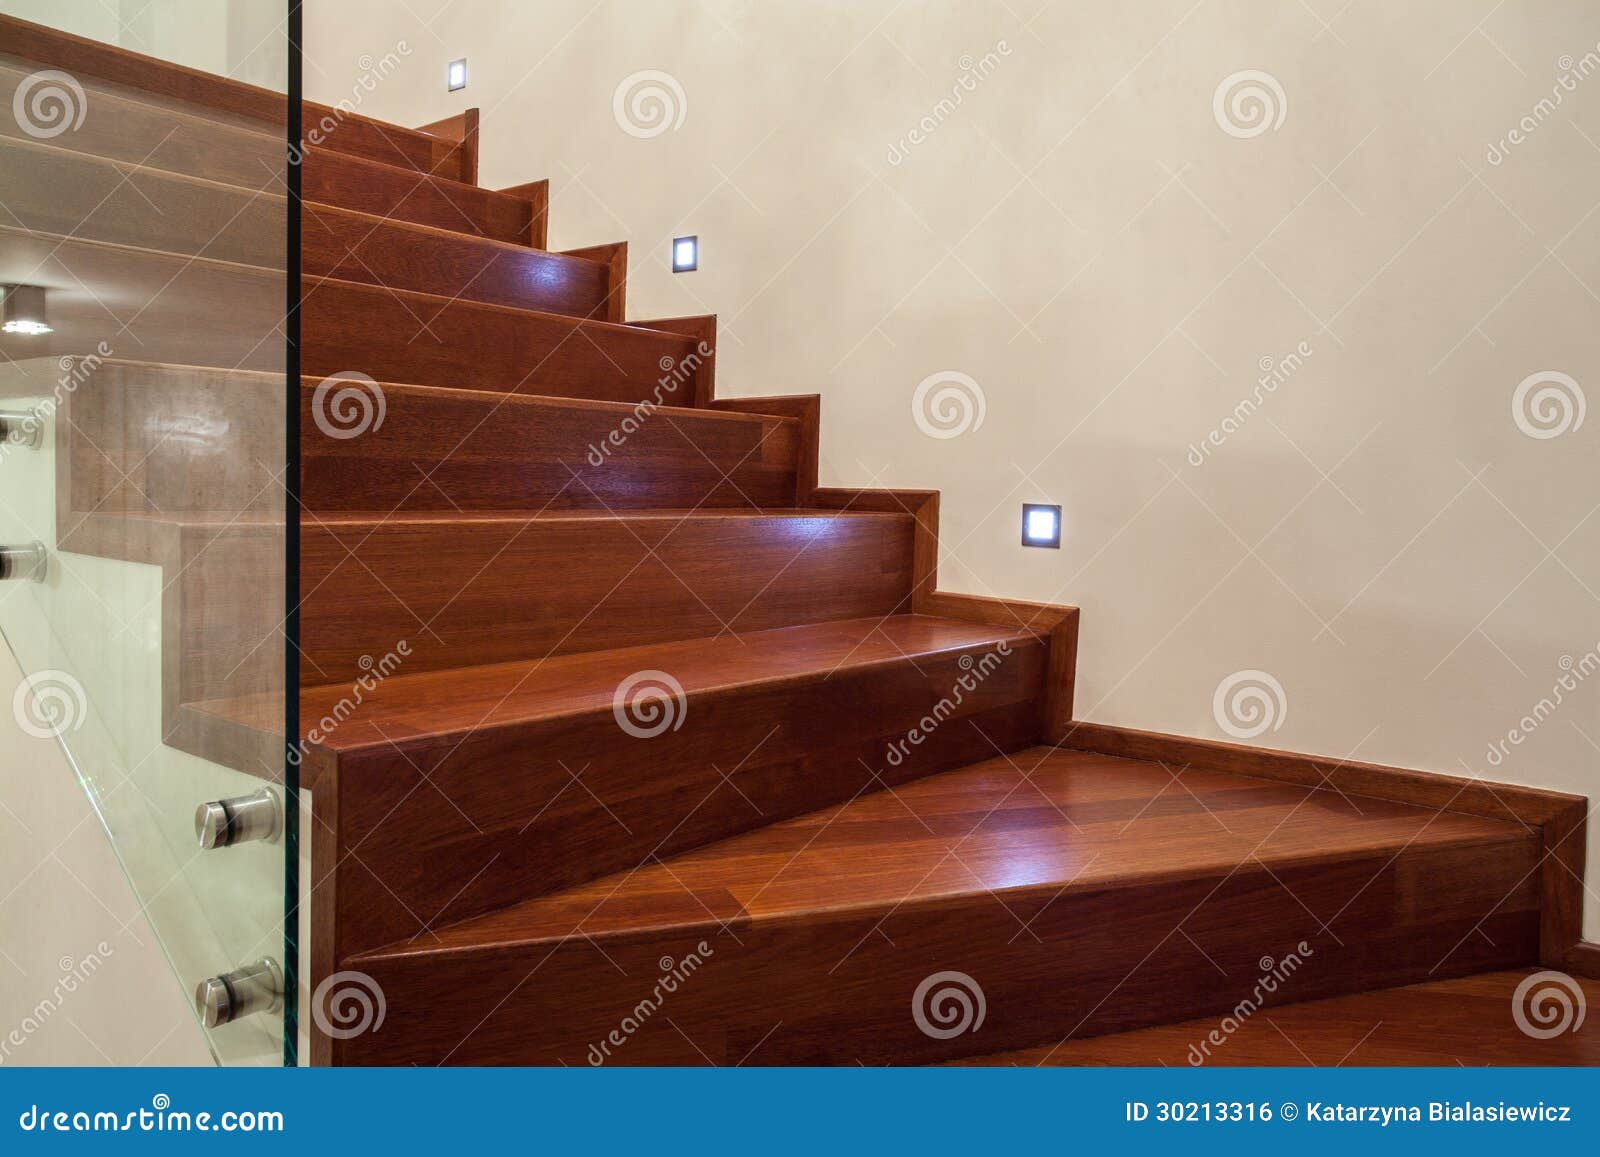 travertine house- stairs in close up